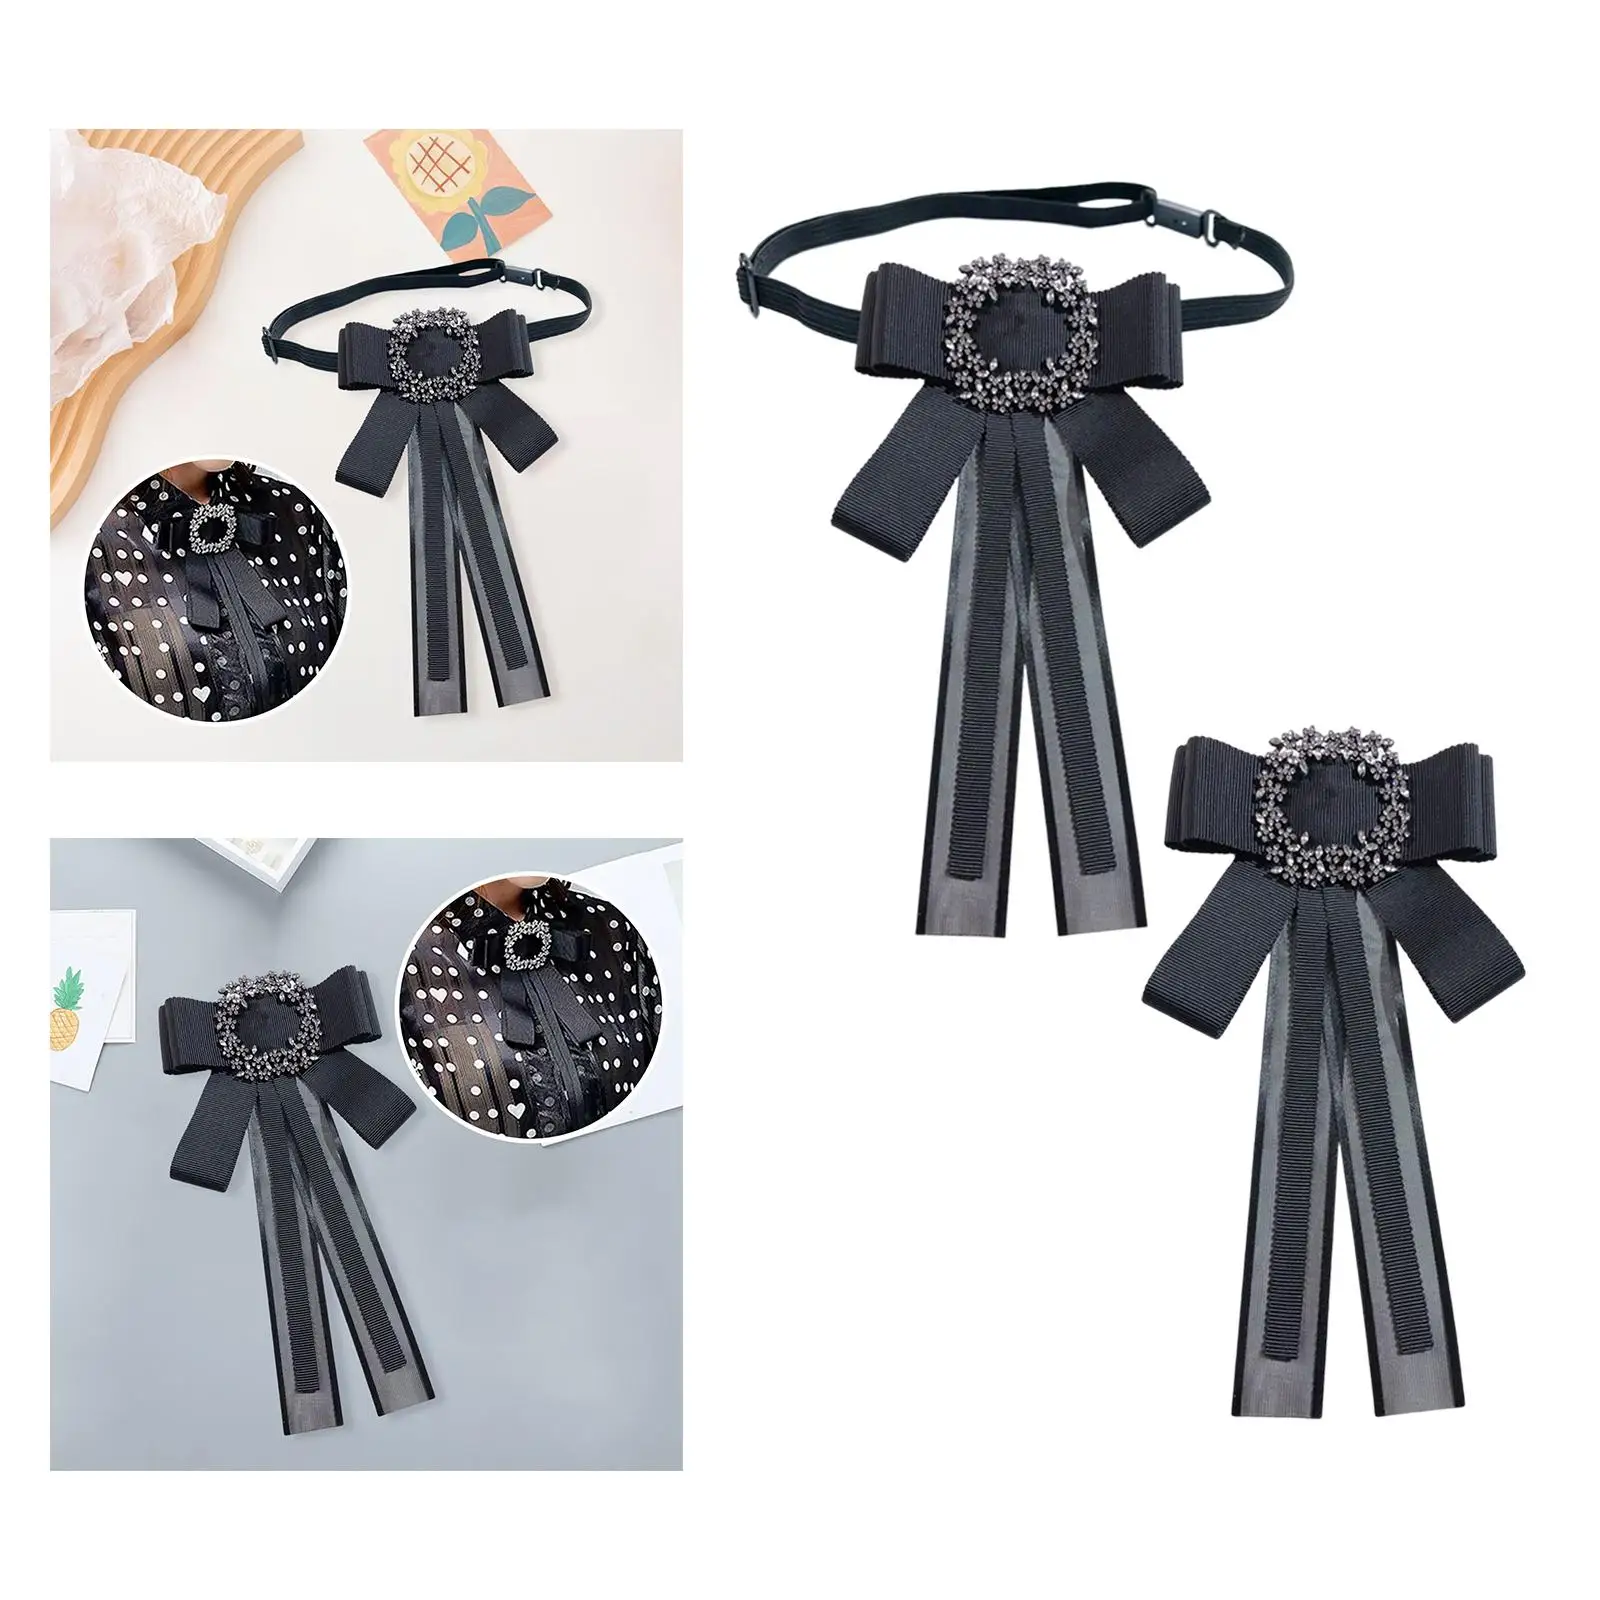 Rhinestone Bow Tie Girls Bowknot Lapel Pin Clothing Accessories Badge Fashion Solid Color Corsage Necktie for Wedding Vest Work